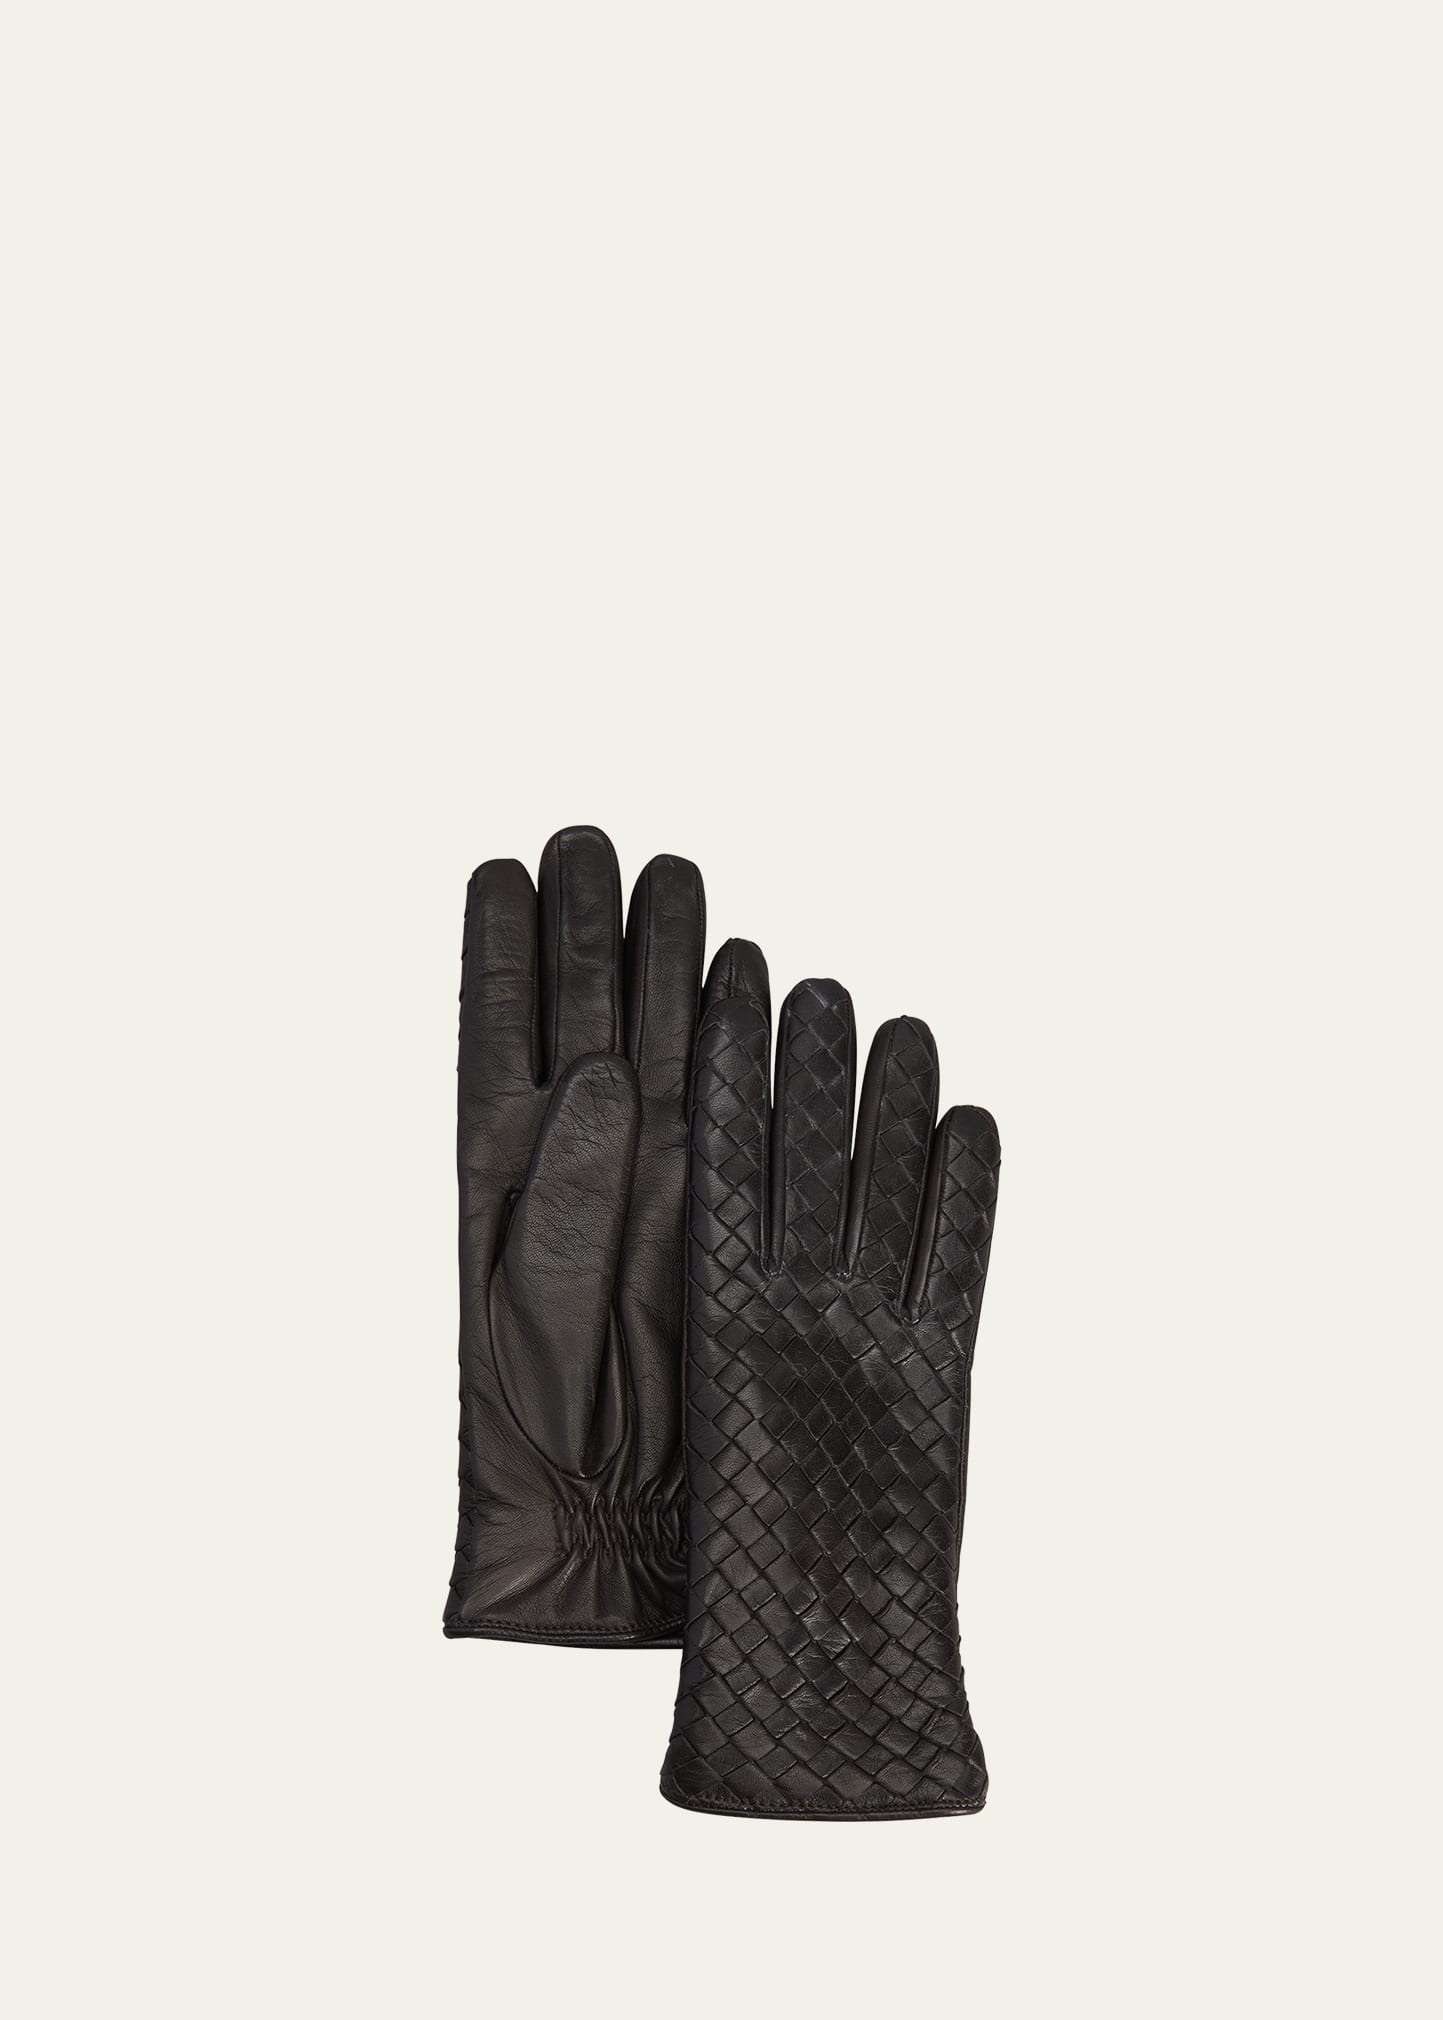 Woven Leather & Cashmere Gloves